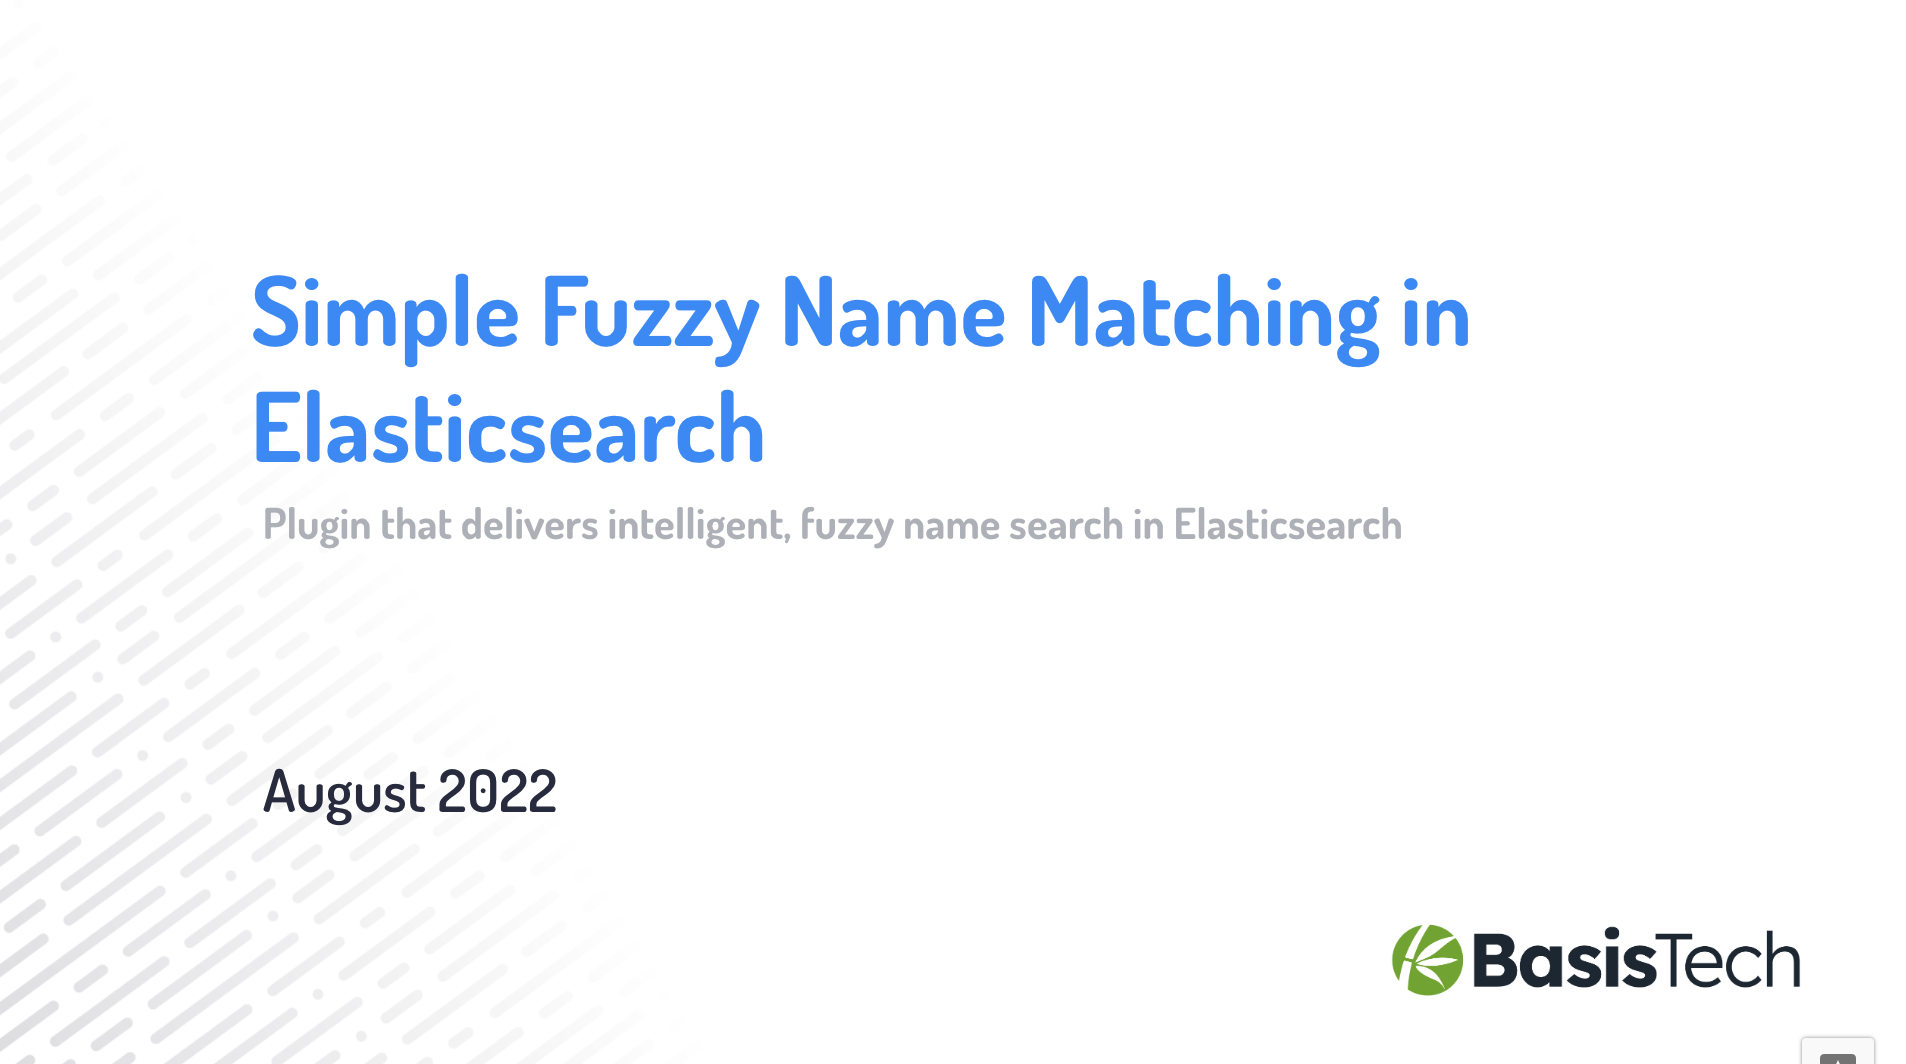 screenshot of slides about simple fuzzy name matching in Elasticsearch